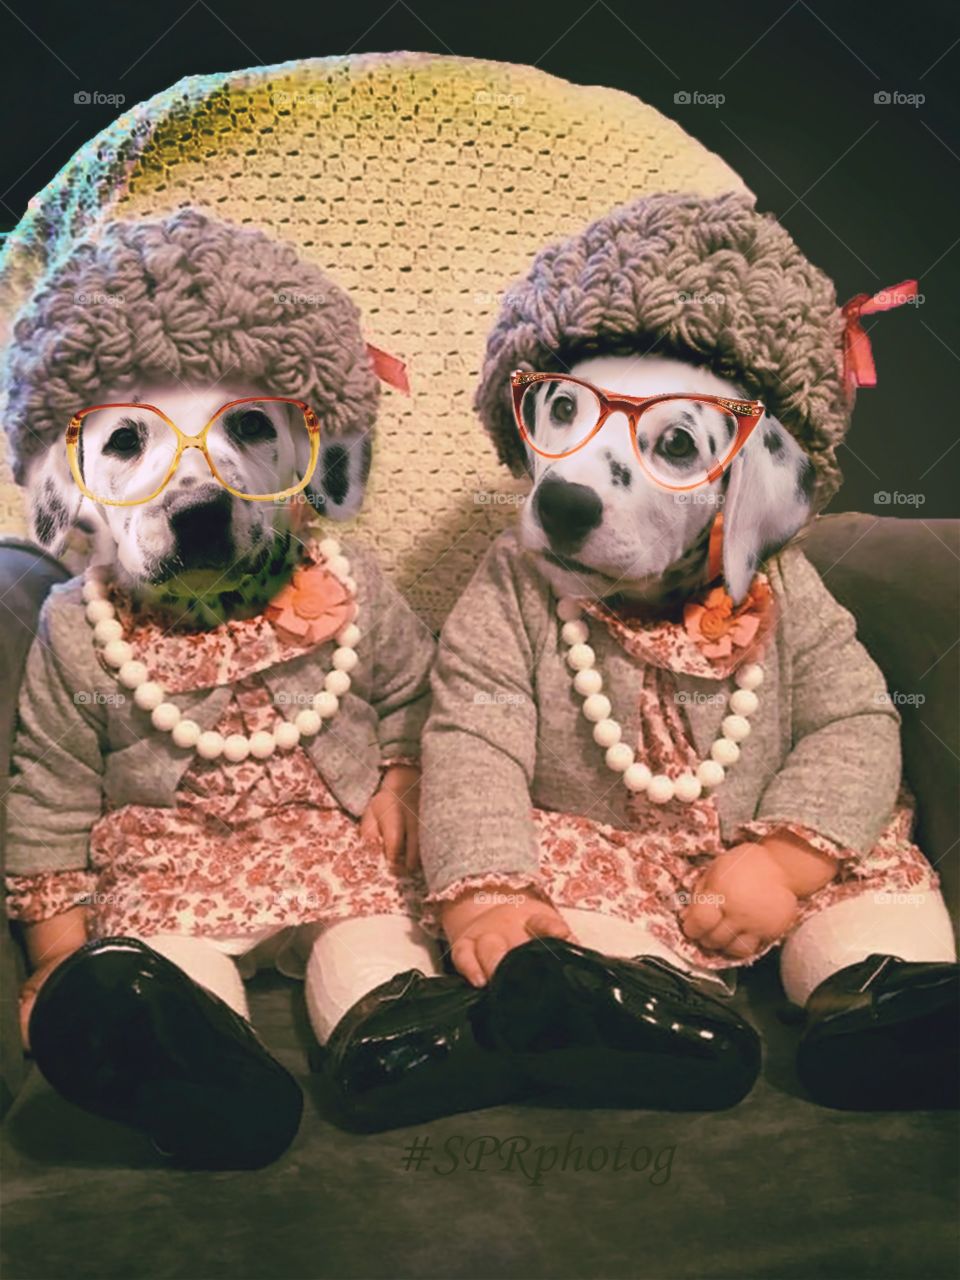 two Dalmatian puppies anthropomorphized as old ladies with glasses sitting in chair